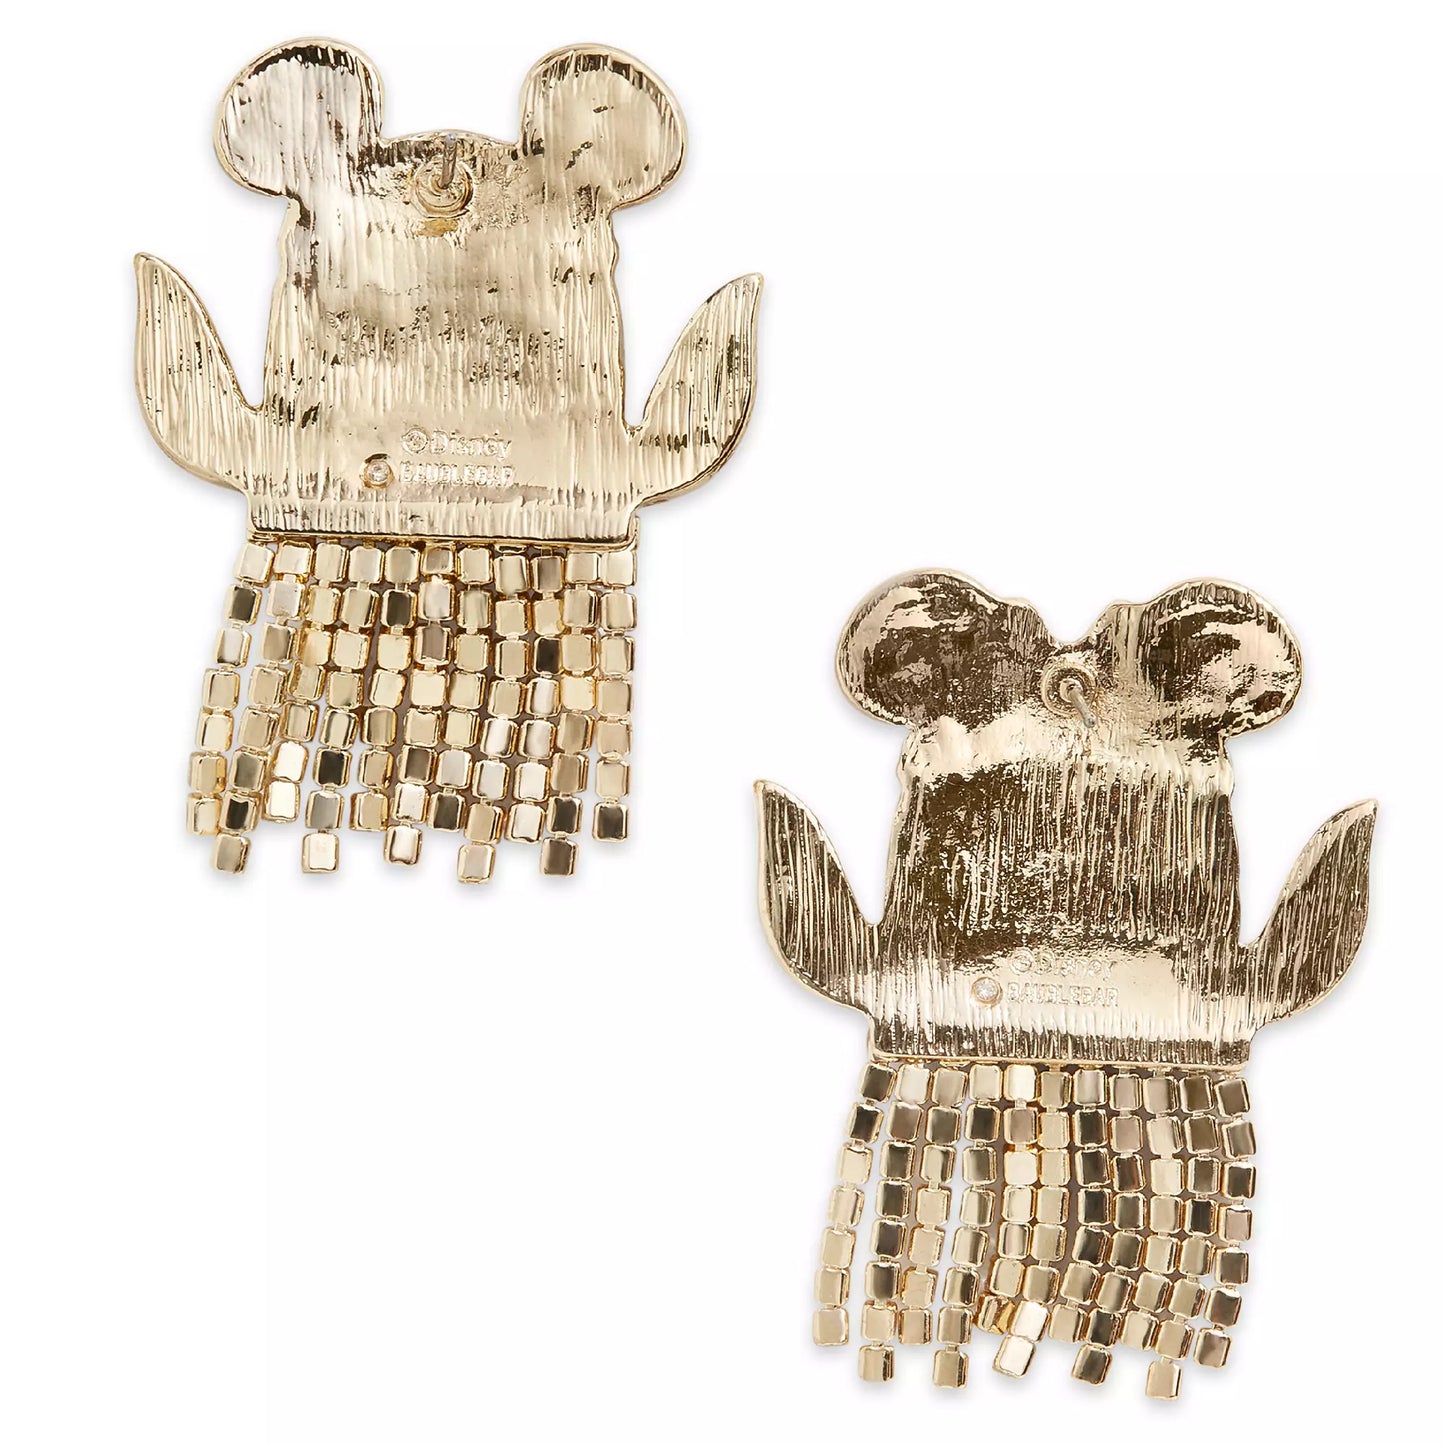 Mickey and Minnie Mouse Ghost Disney BaubleBar Earrings